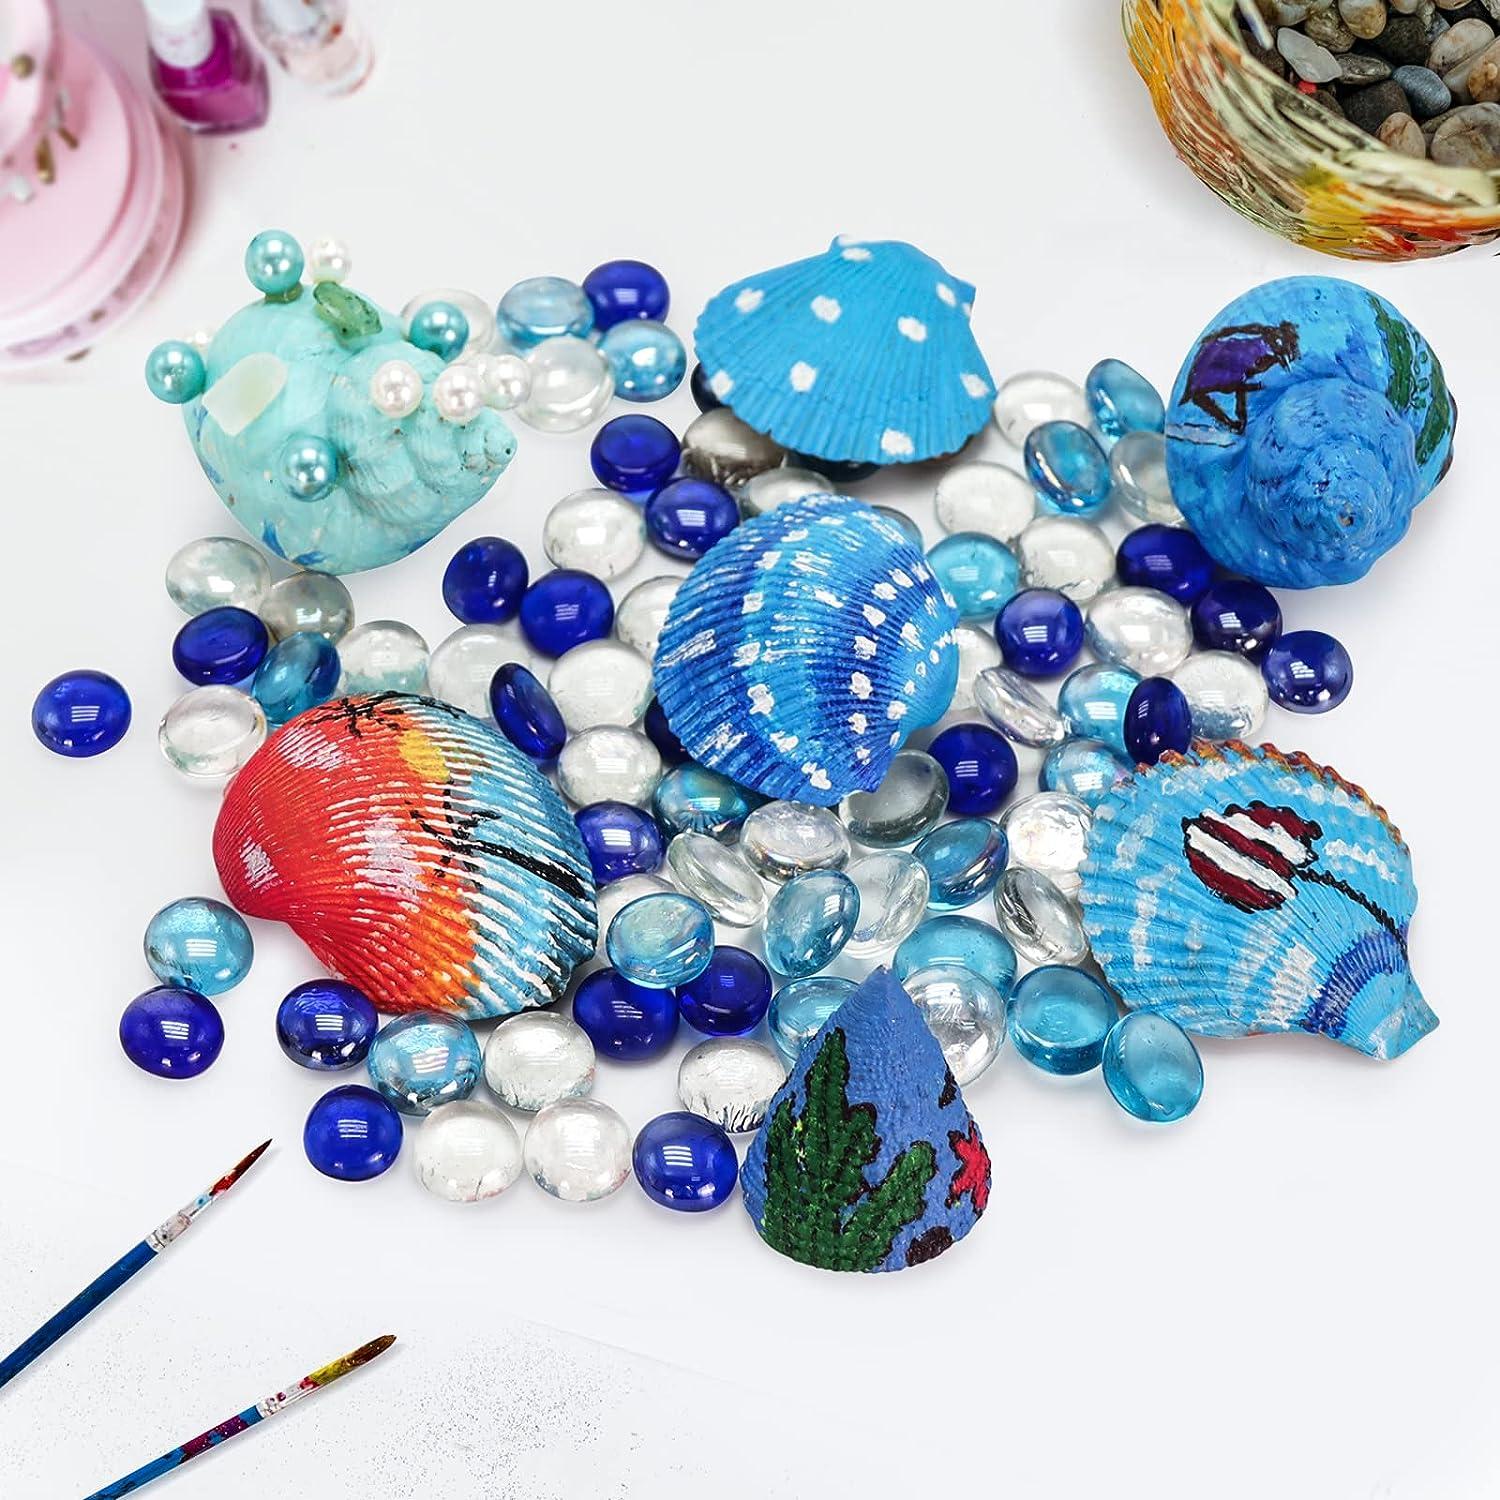 Shell Painting Kit-Arts and Crafts for Girls & Boys Ages 4-12